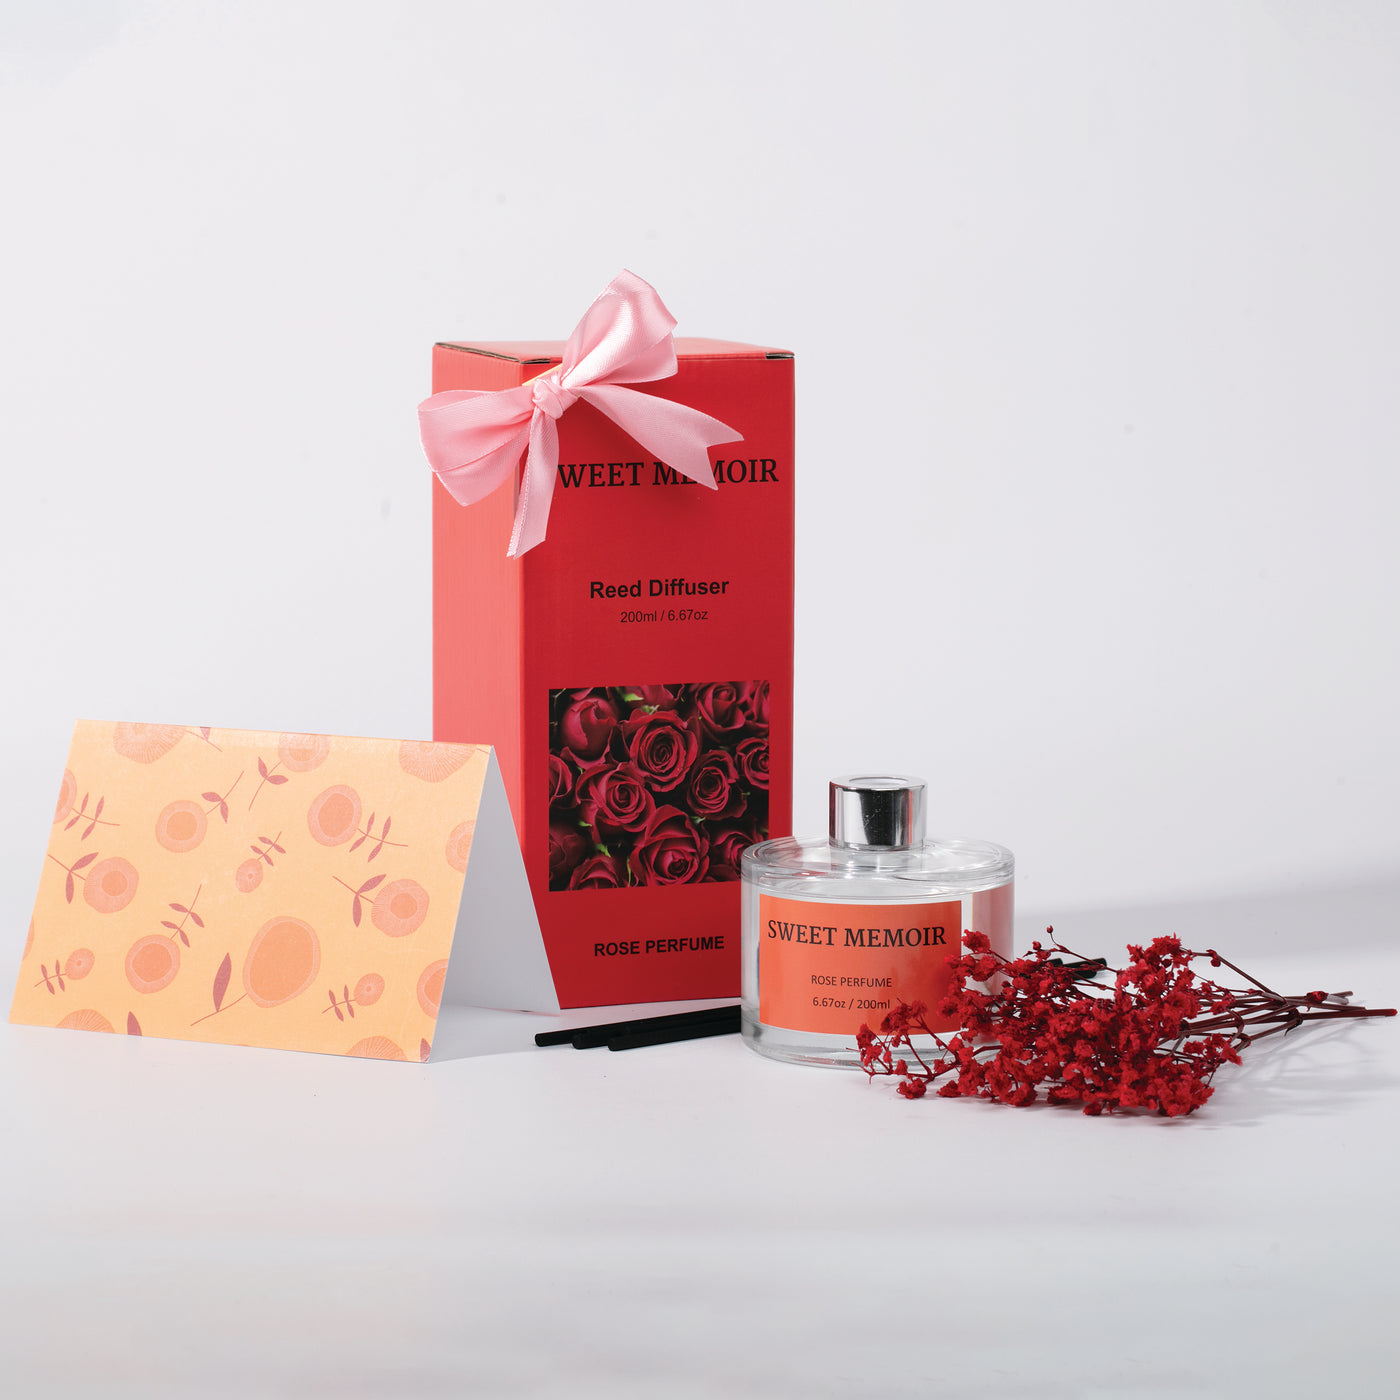 A selection of Sweet Memoir reed diffuser gift sets, featuring different scents and a stylish gift box with a pink ribbon.